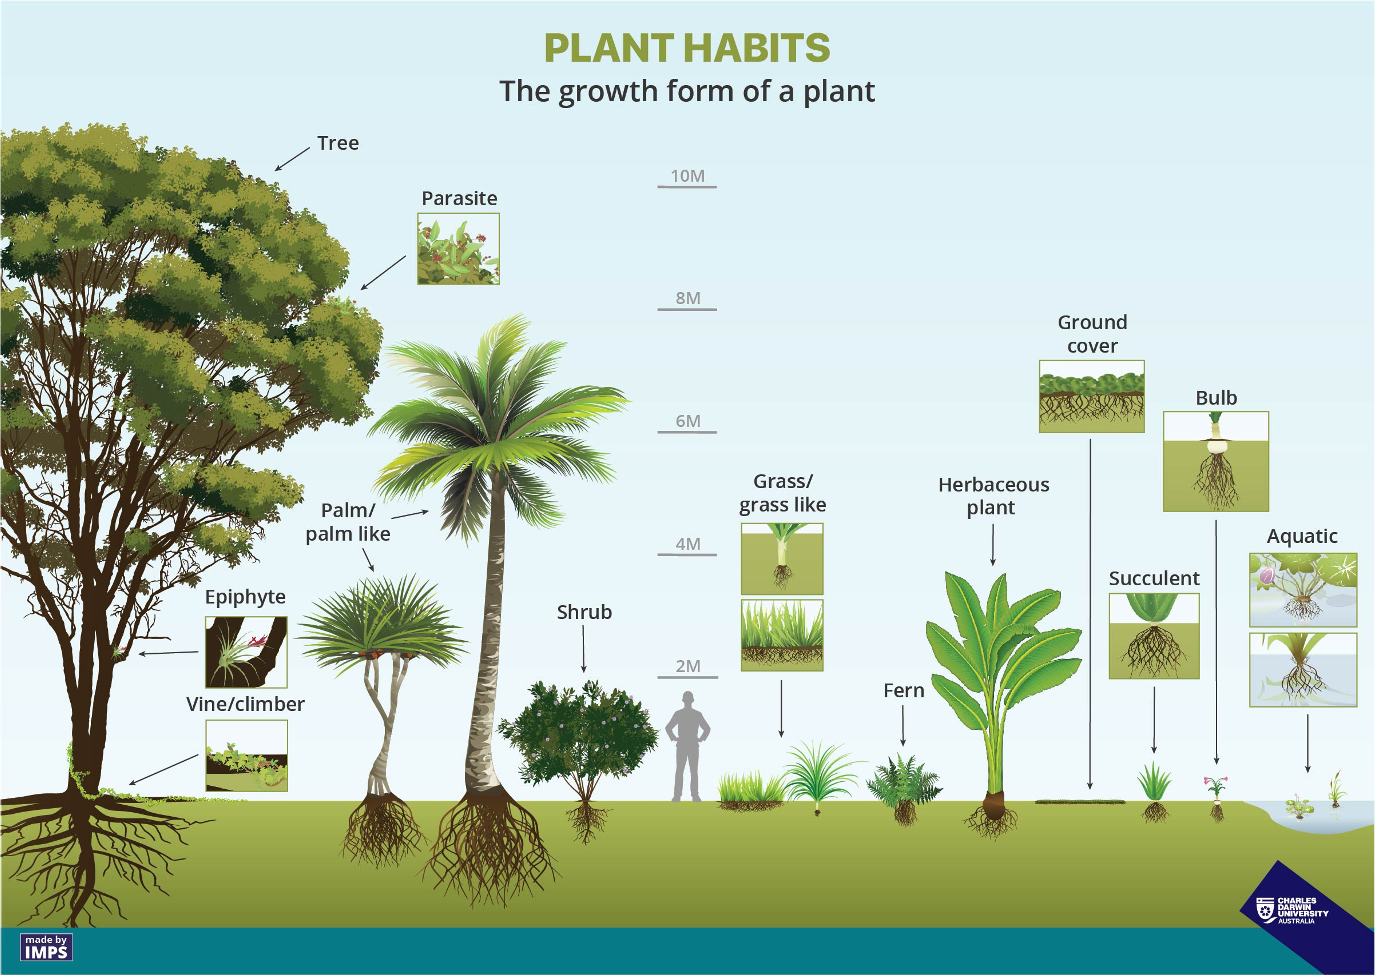 examples of different types of habits, including trees, vines, palms, shrubs, grasses, ferns, etc.